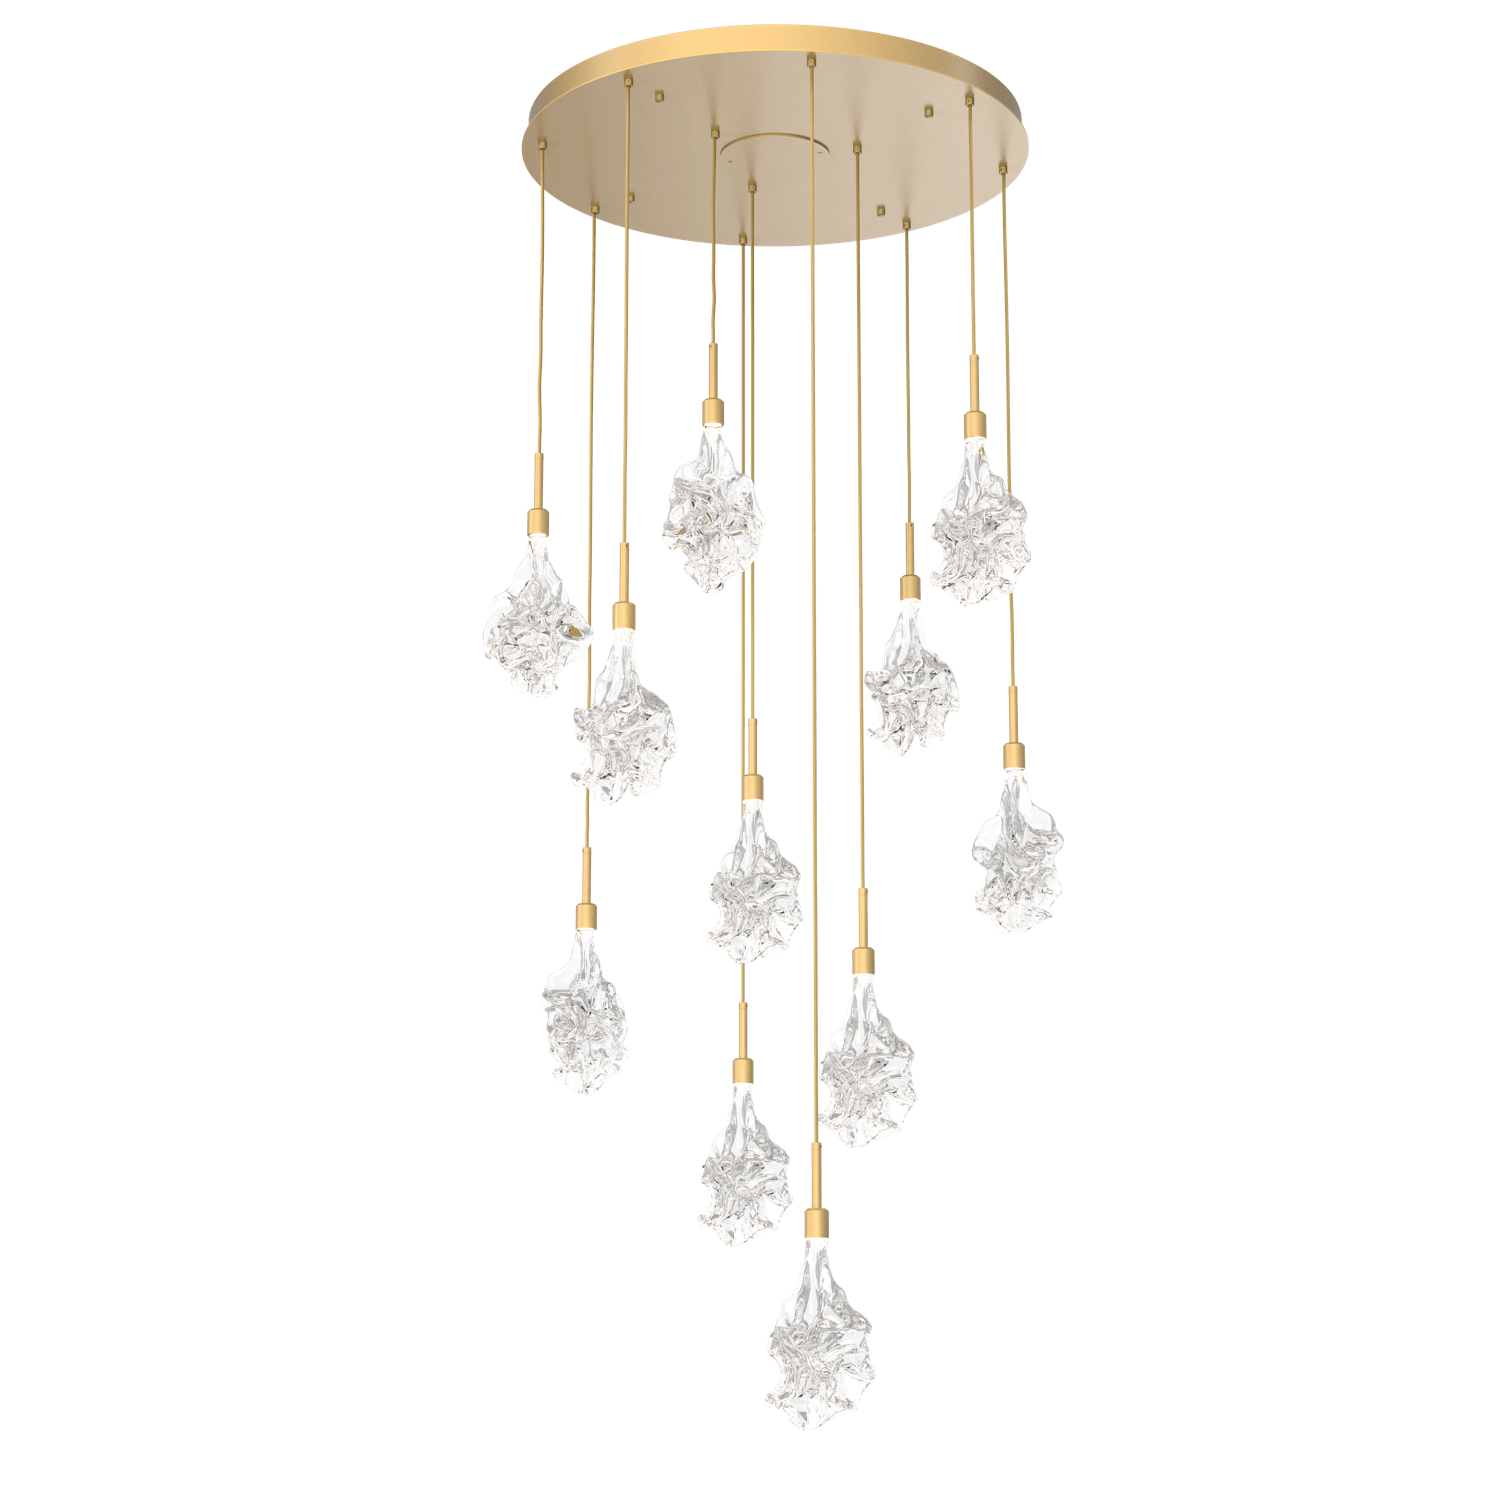 CHB0059-11-GB-Hammerton-Studio-Blossom-11-light-round-pendant-chandelier-with-gilded-brass-finish-and-clear-handblown-crystal-glass-shades-and-LED-lamping